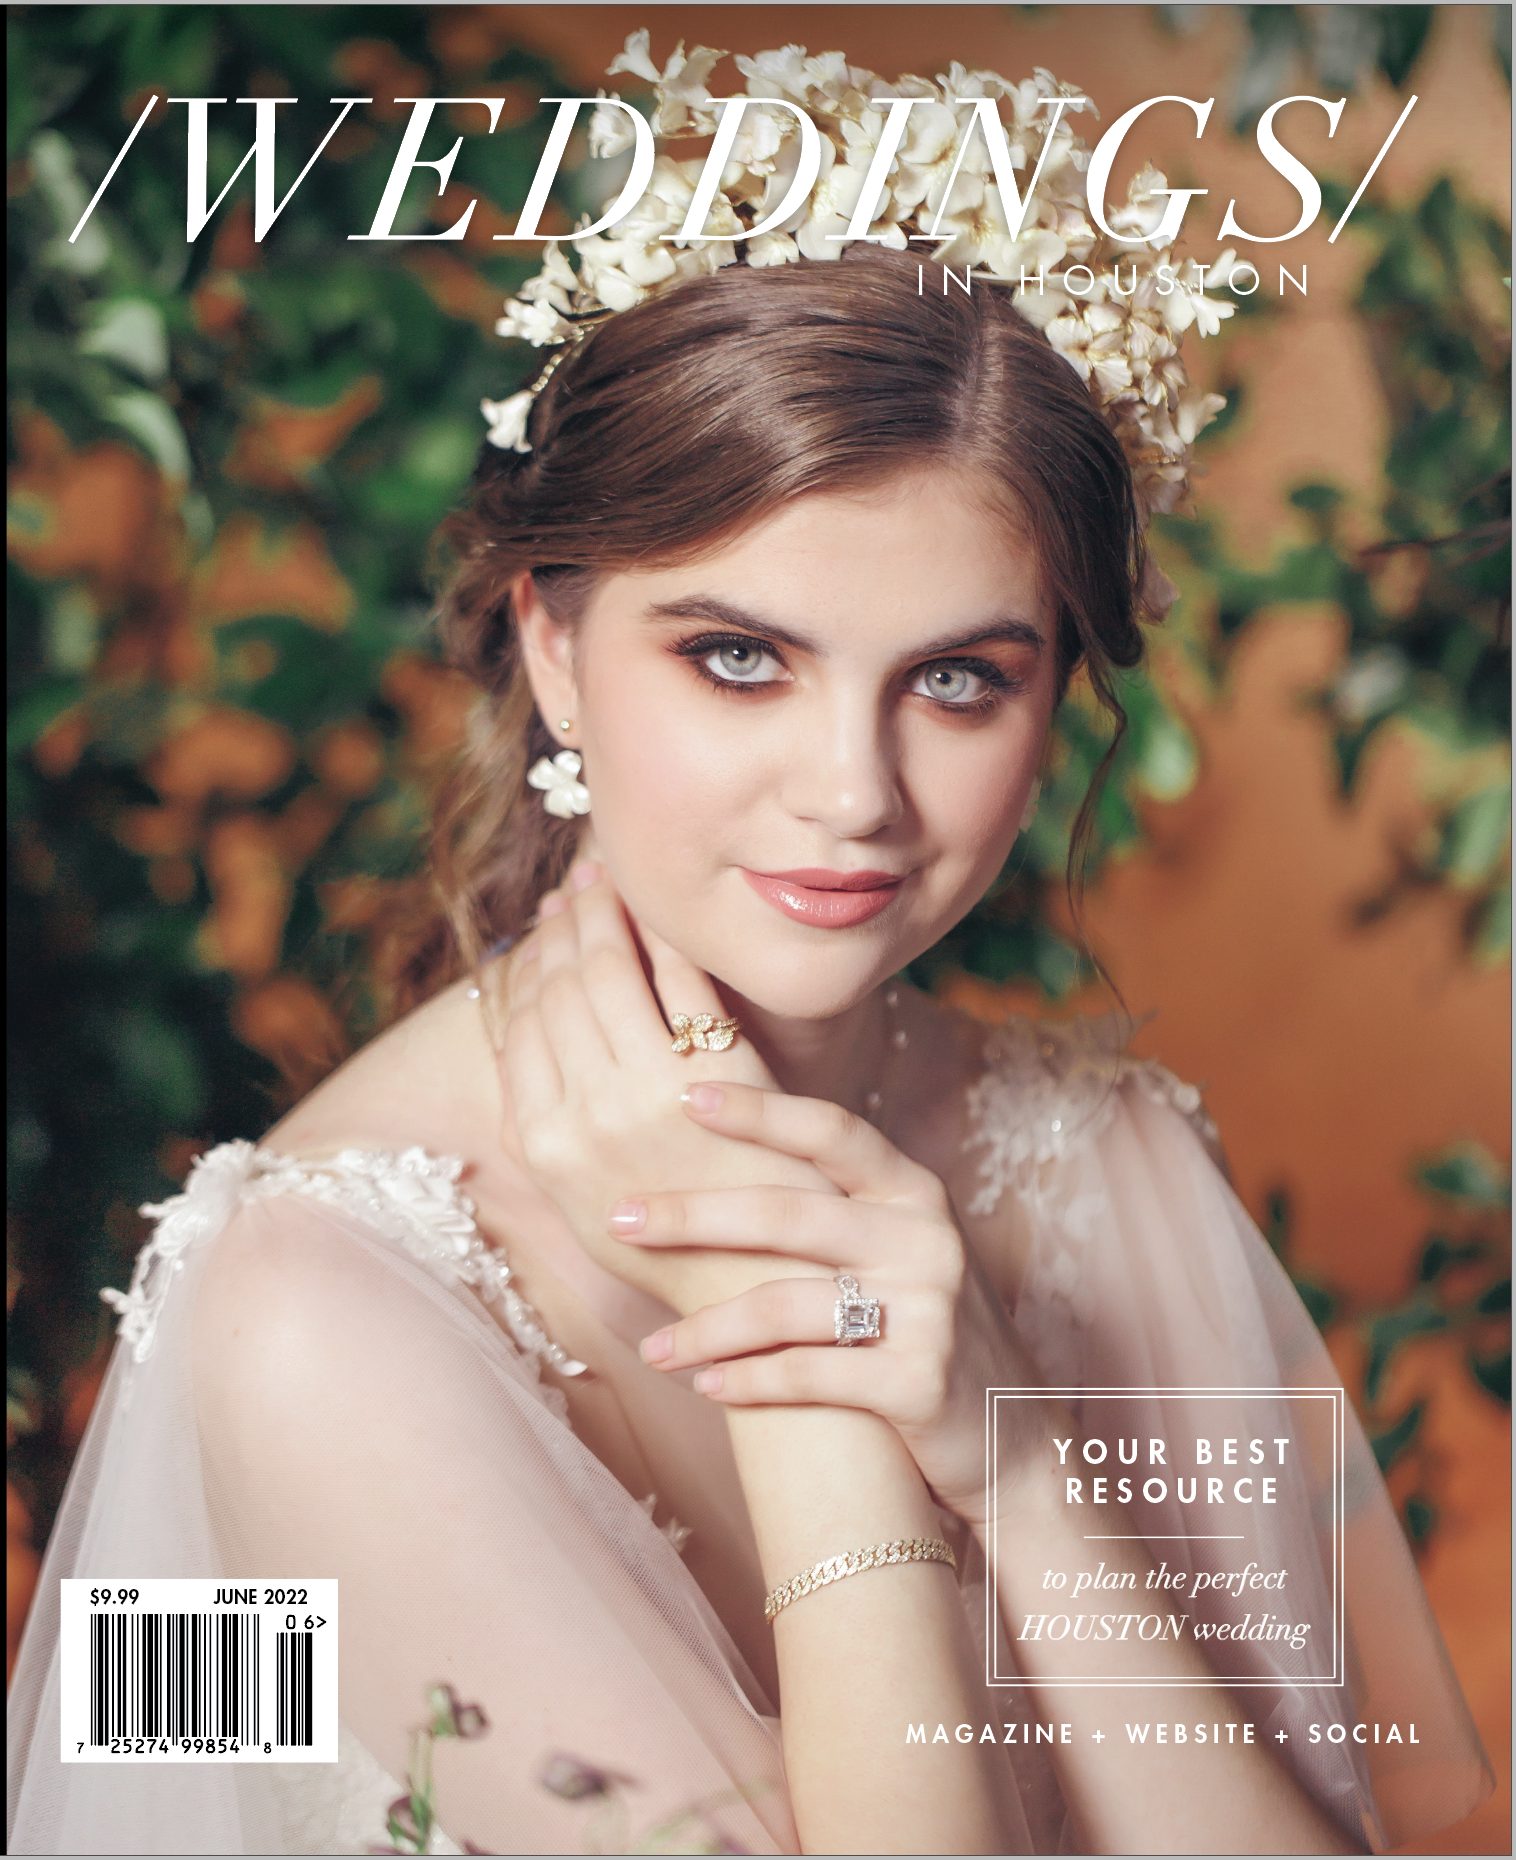 The June 2022 Weddings in Houston magazine cover with a bride wearing a floral crown and luxury jewelry for a romantic fairytale bridal look. 